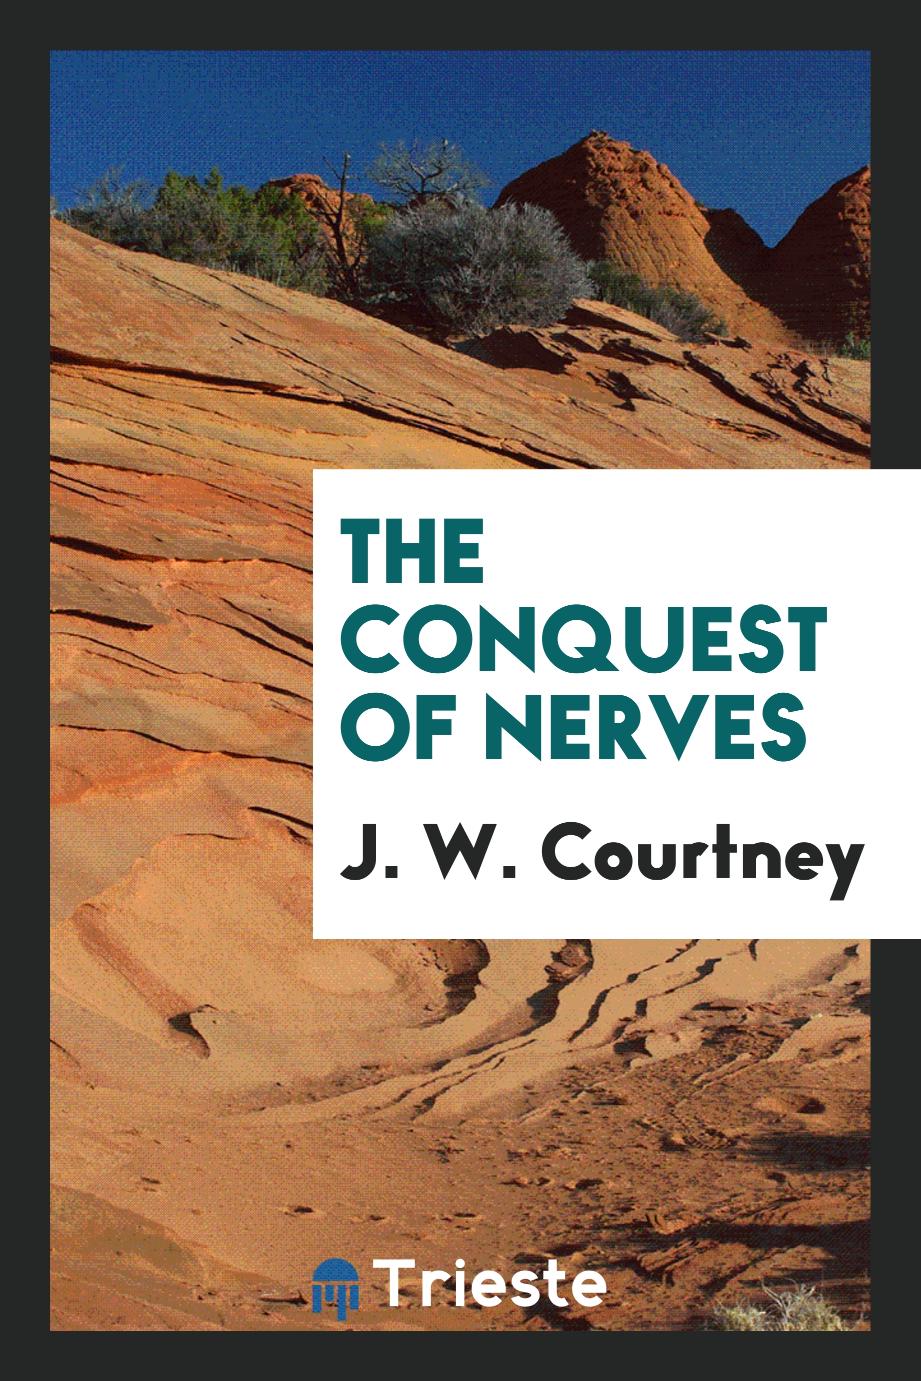 The conquest of nerves